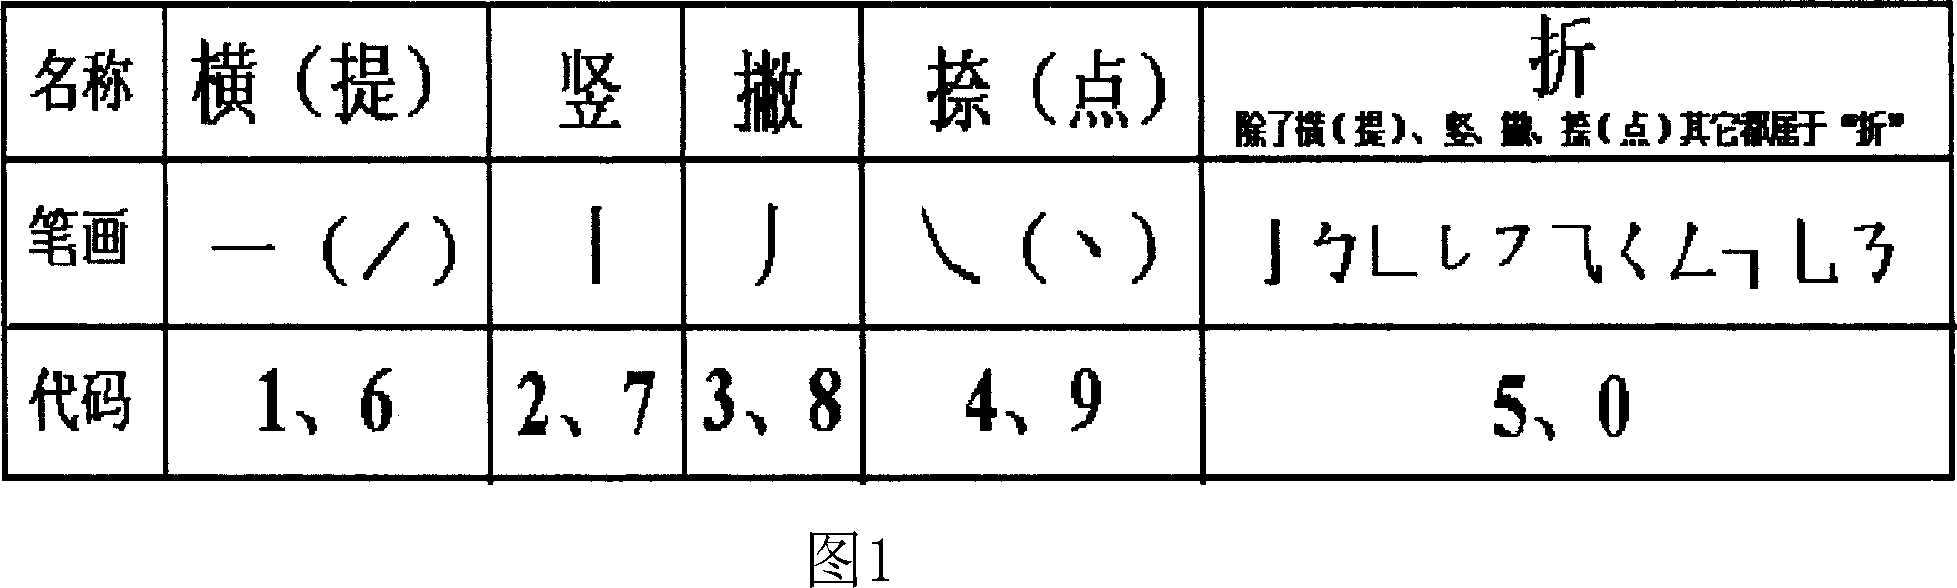 Number code upgraded Chinese character input method